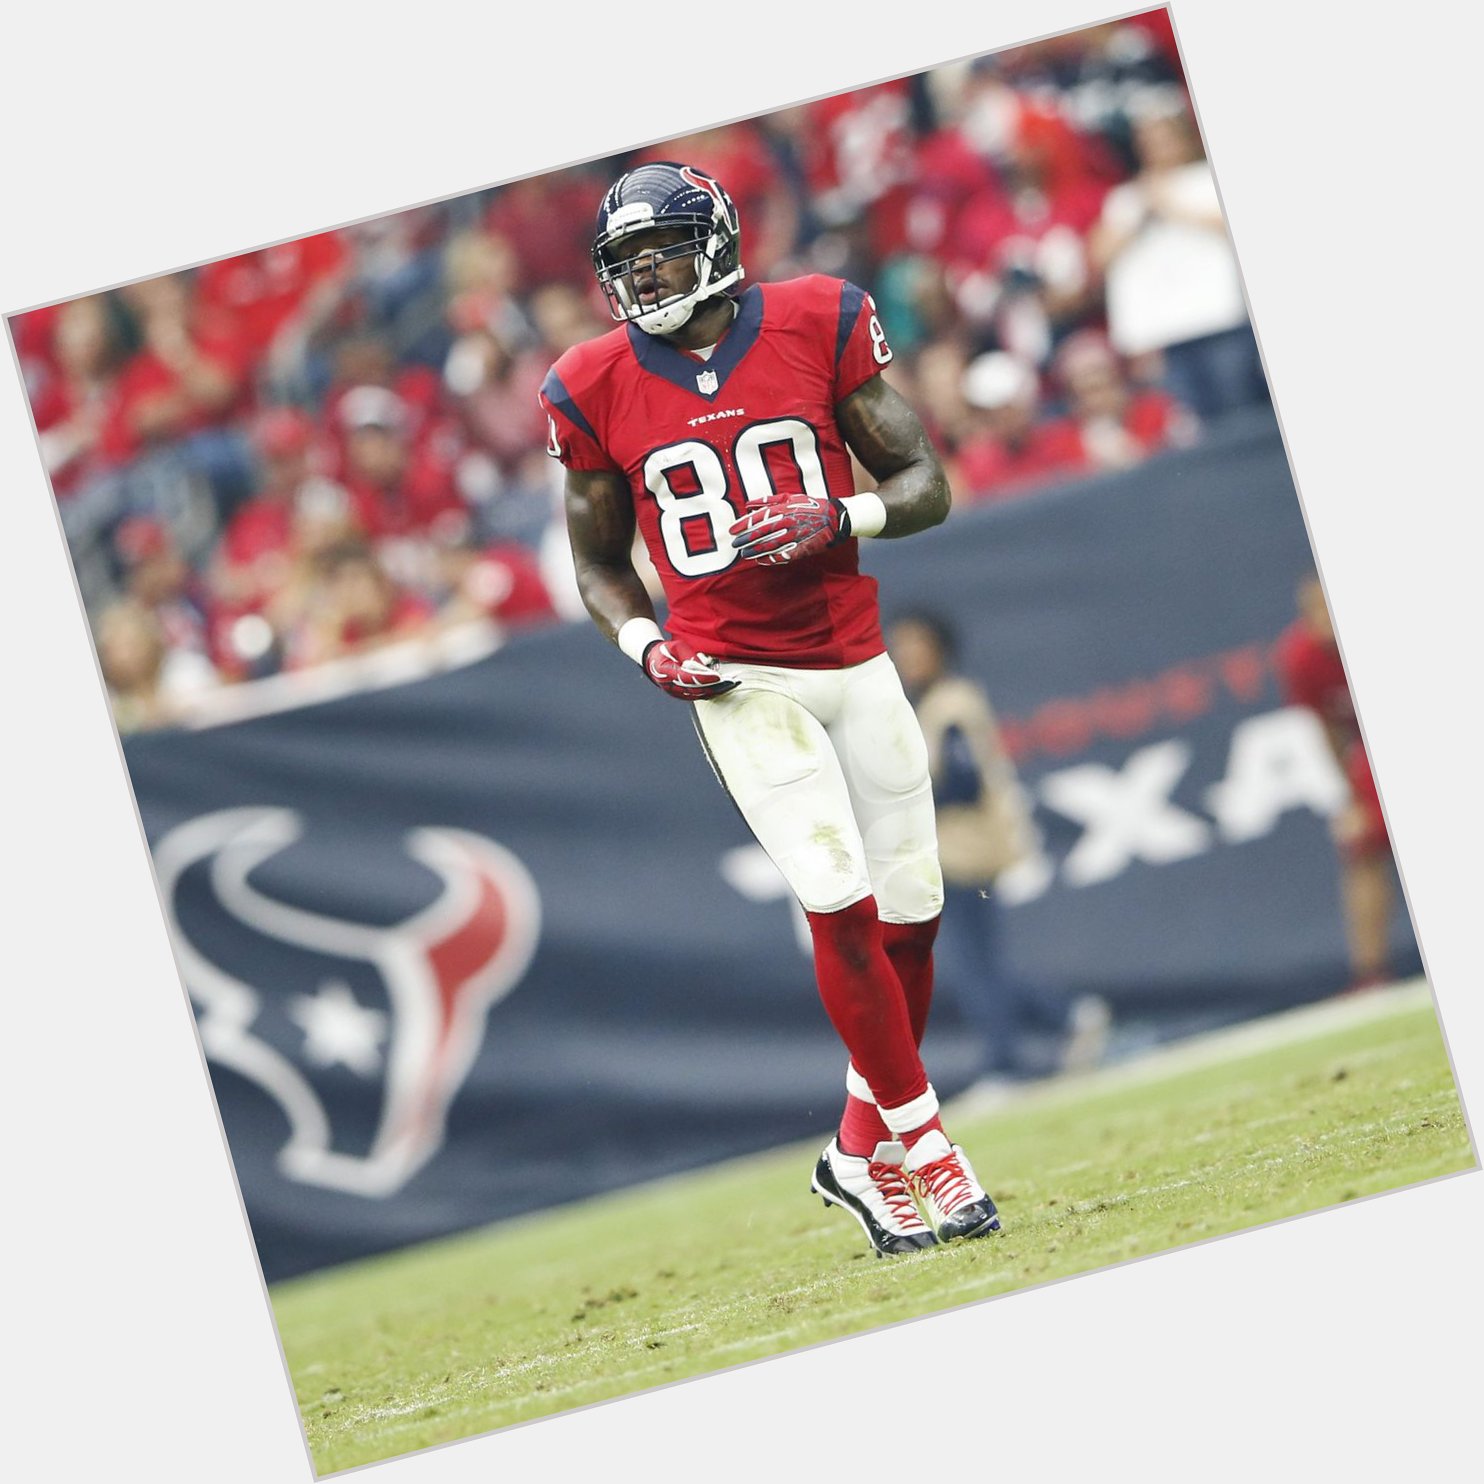 Happy Birthday Andre Johnson! What\s your favorite Andre Johnson memory? 